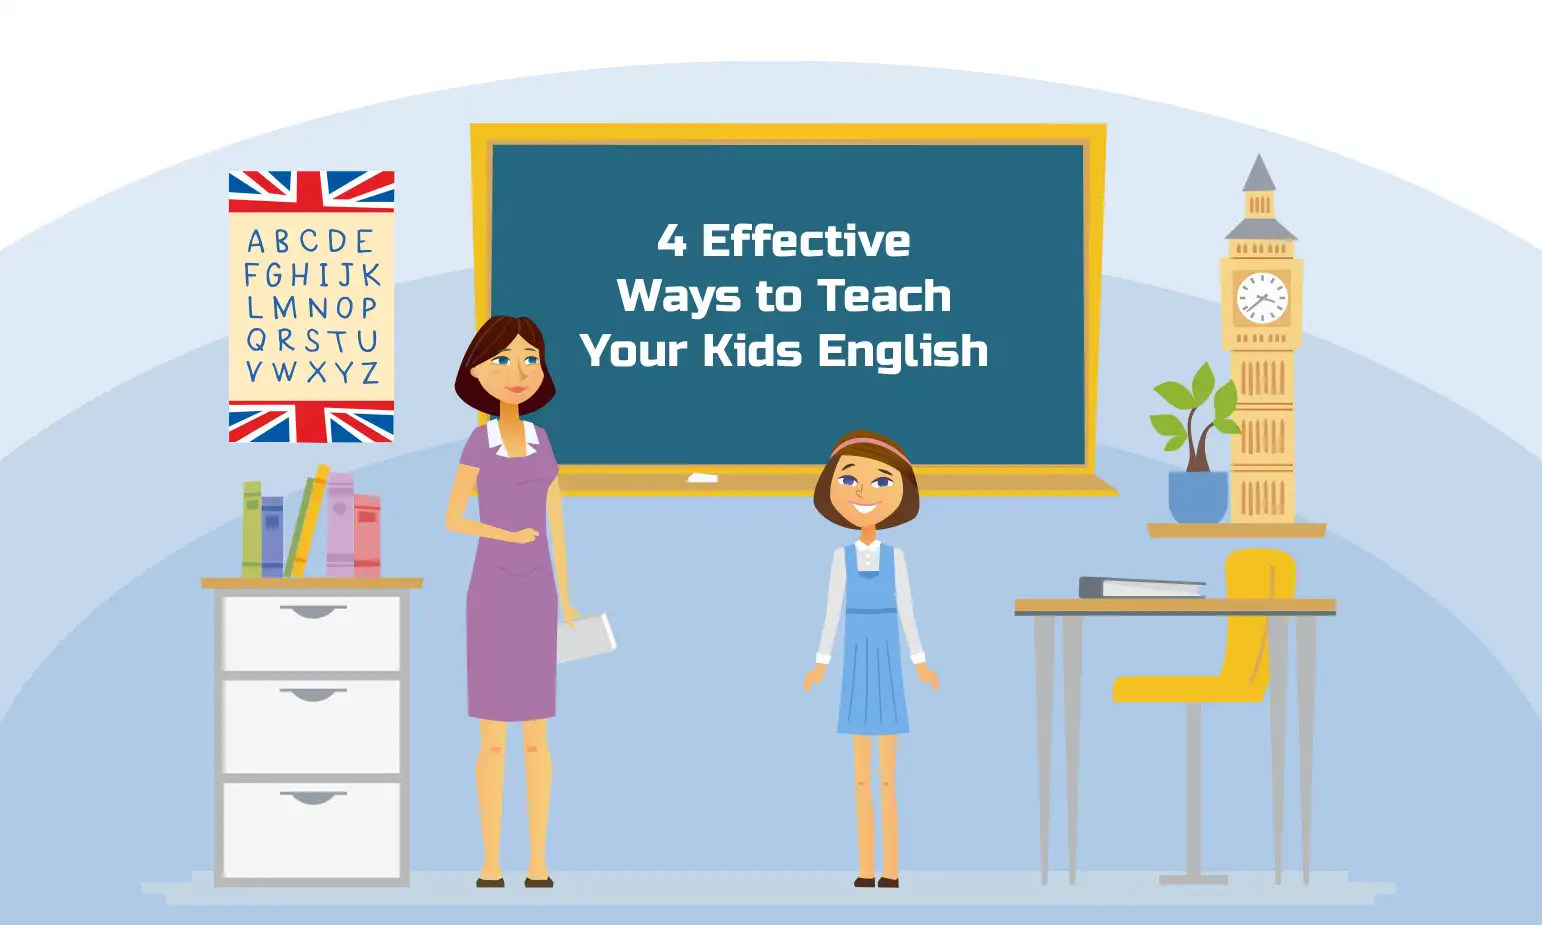 4 Effective Ways to Teach Your Kids English